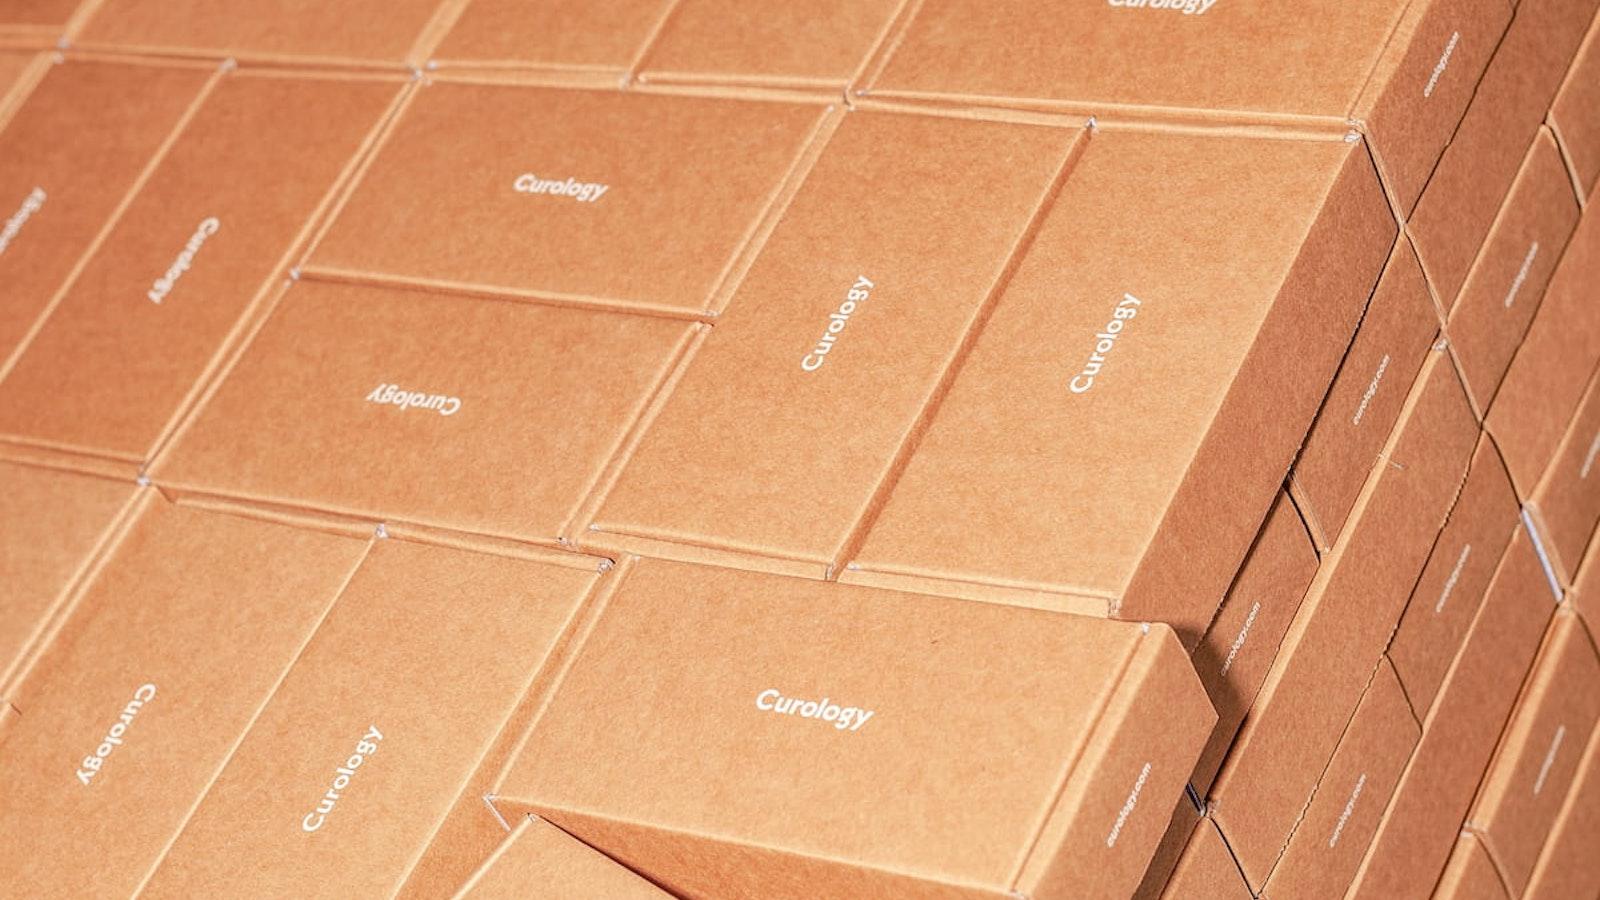 A completed kitting and packaging fulfilment service consisting of a palette of boxes